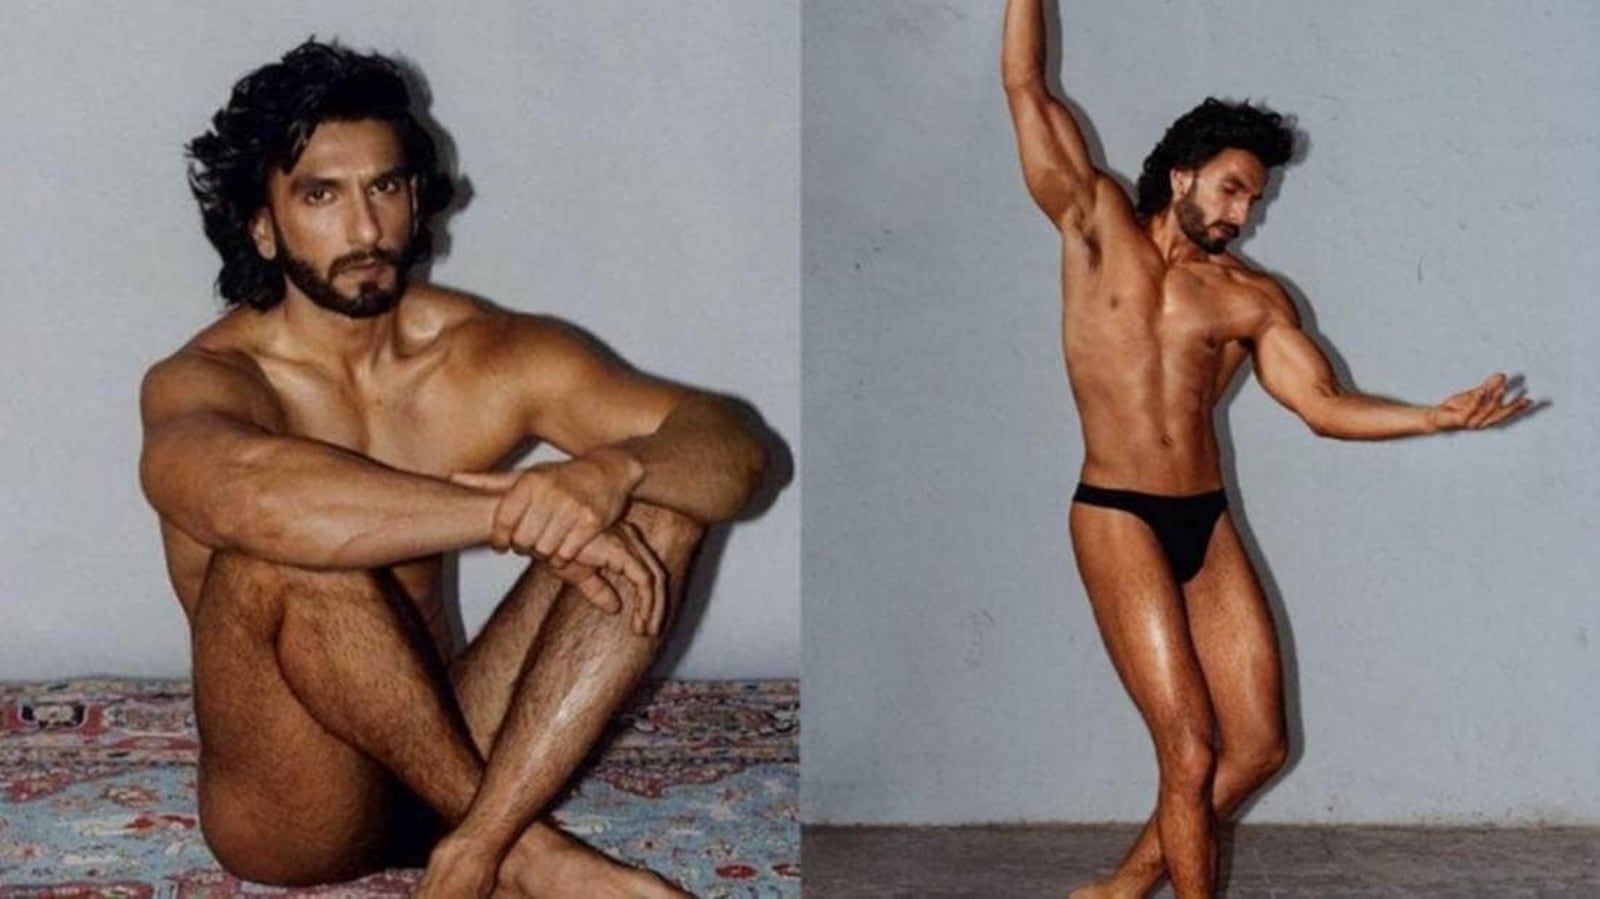 In nude photo shoot case, Ranveer says images posted online were morphed Report Latest News India